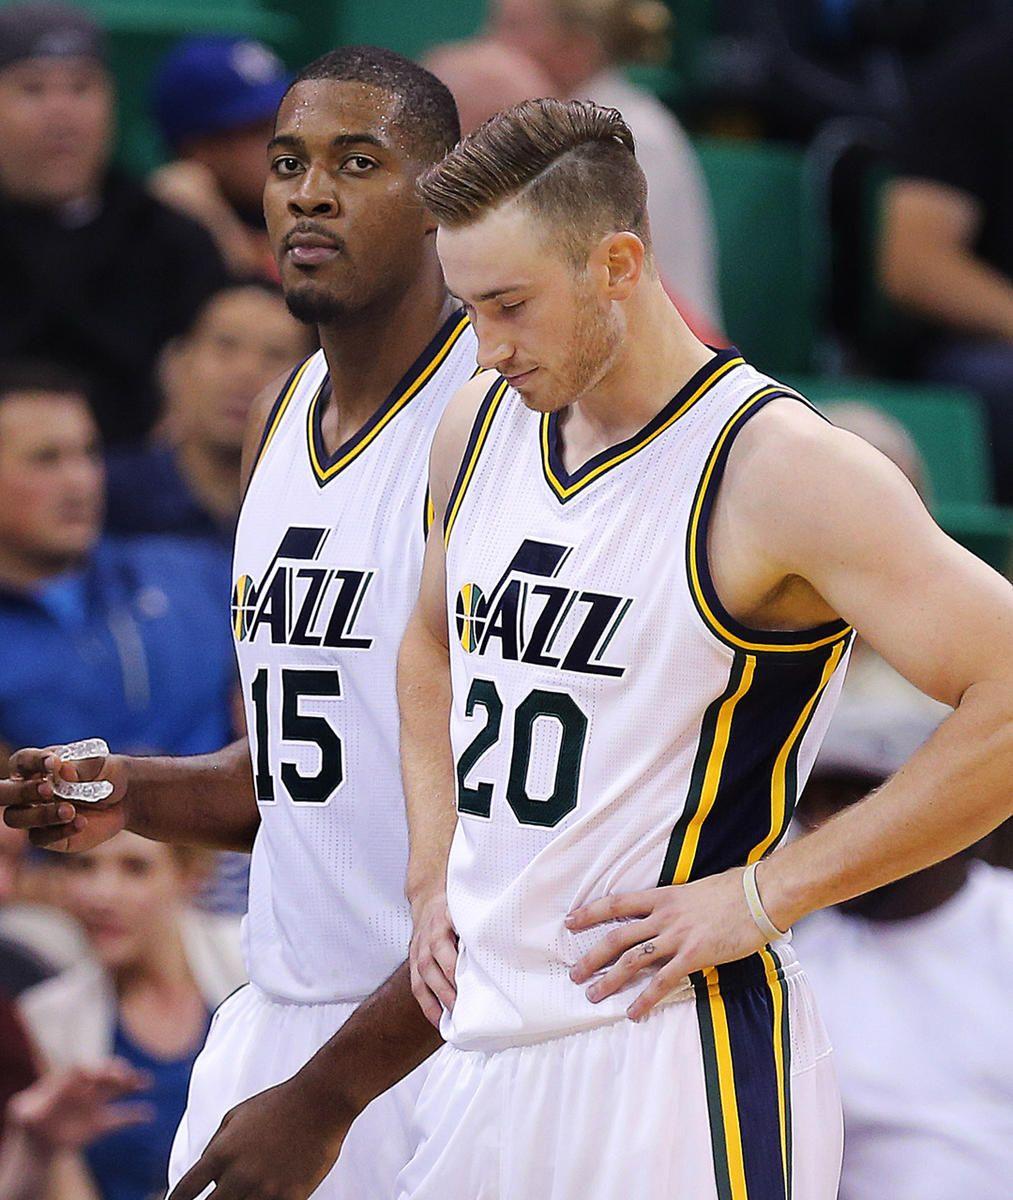 Gordon Hayward, Derrick Favors are now the veterans, ready to lead